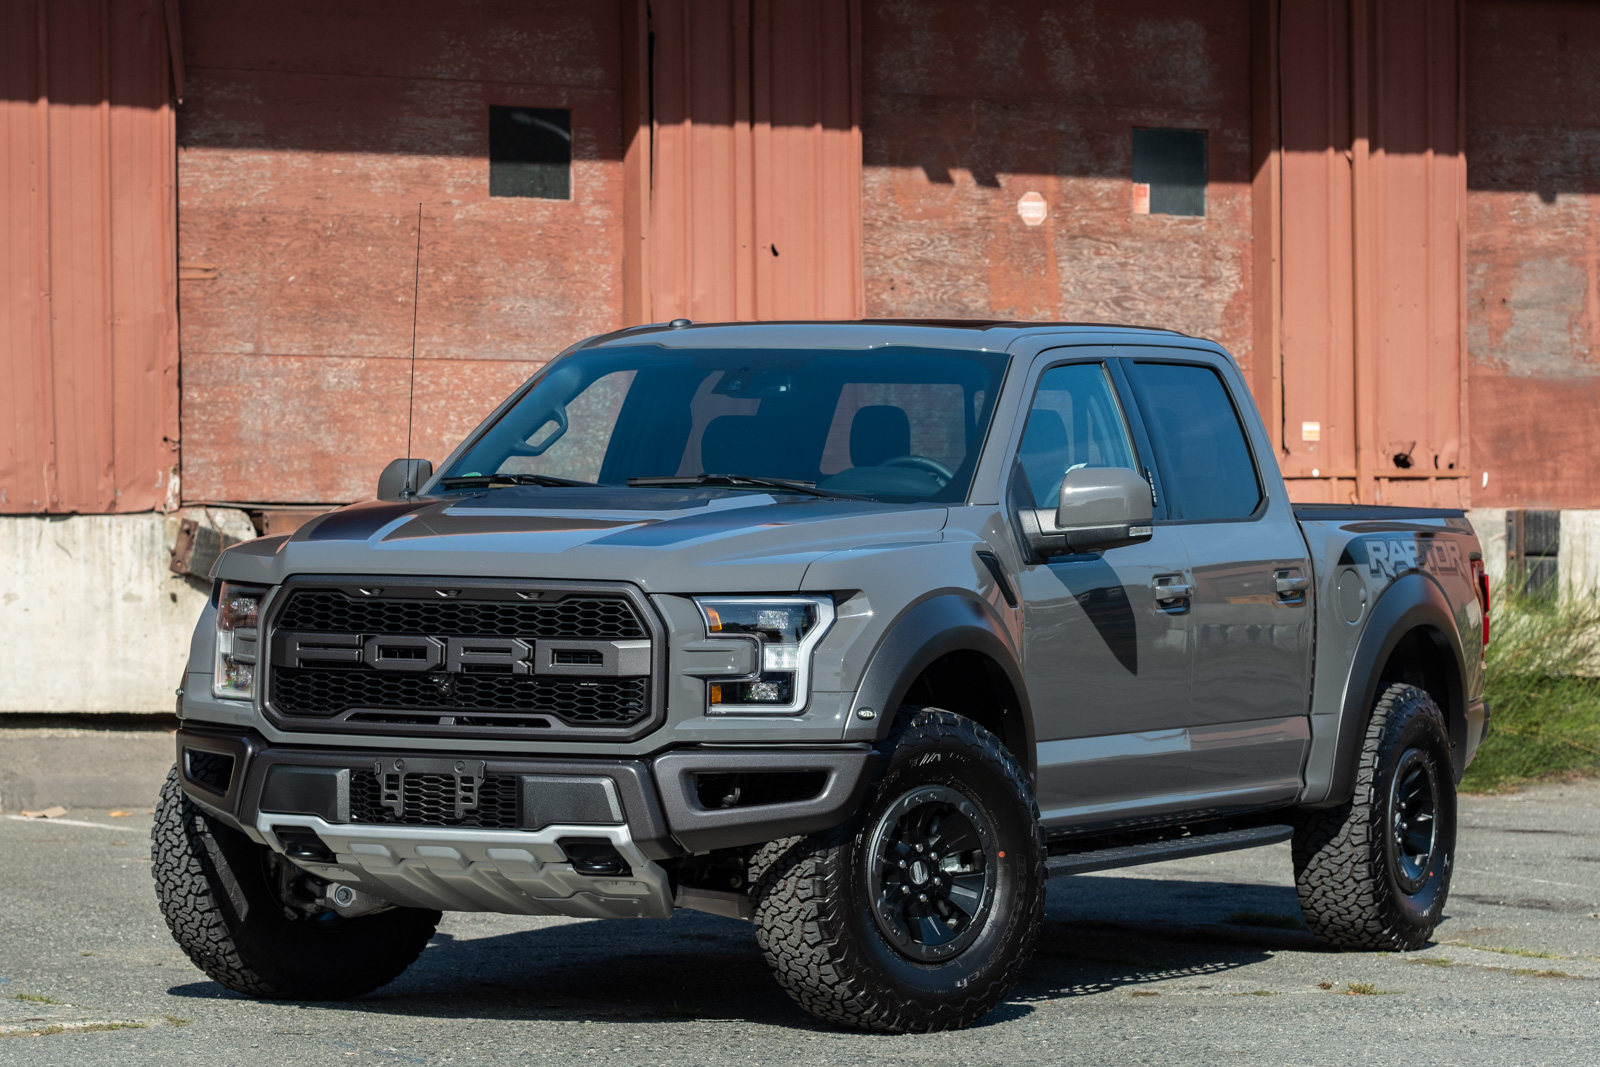 2018 Ford F 150 Raptor Supercrew Limited Luxury Features Exterior And Interior First Look Hd